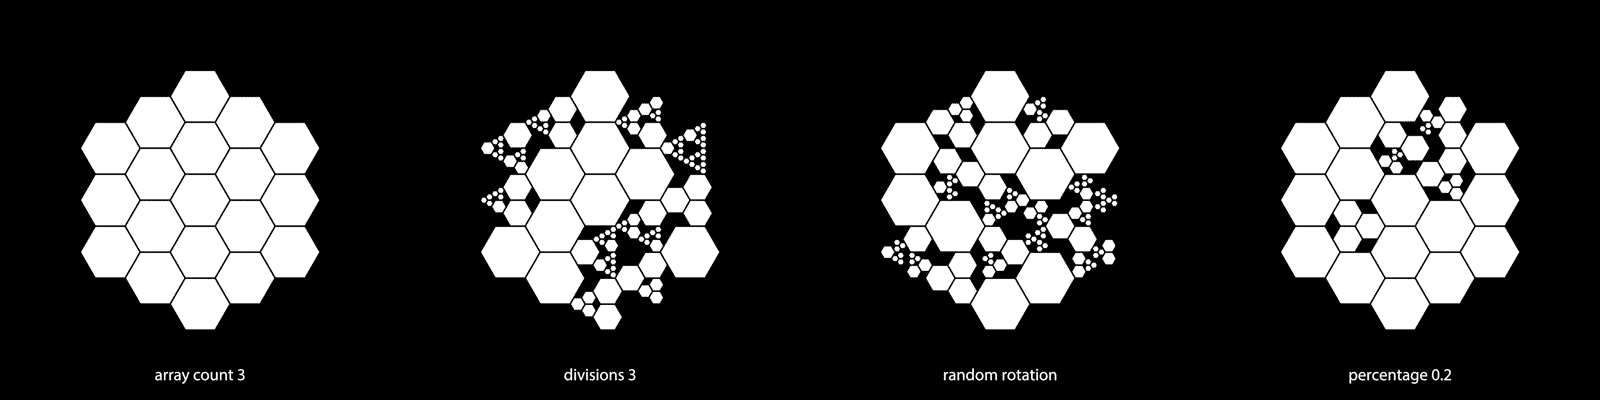 examples of settings for the hexagonal array